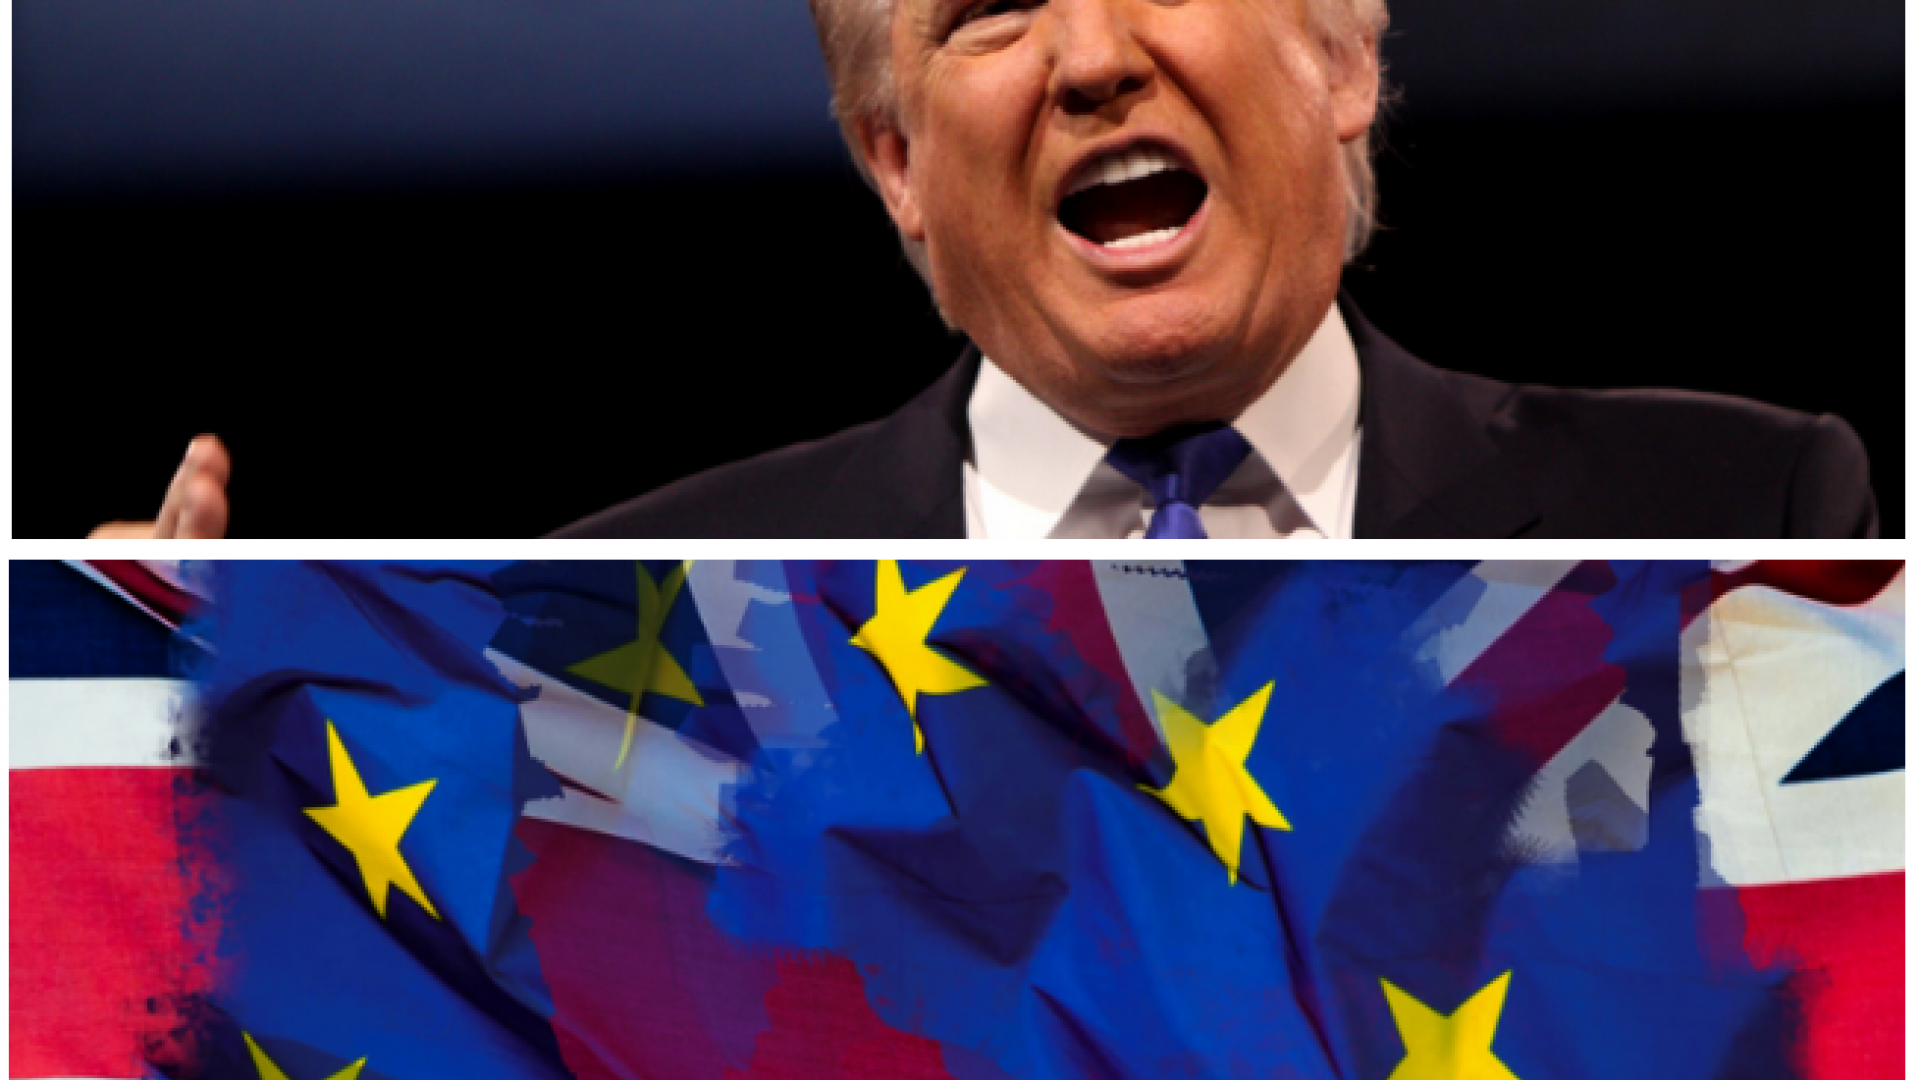 Brexit and Trump